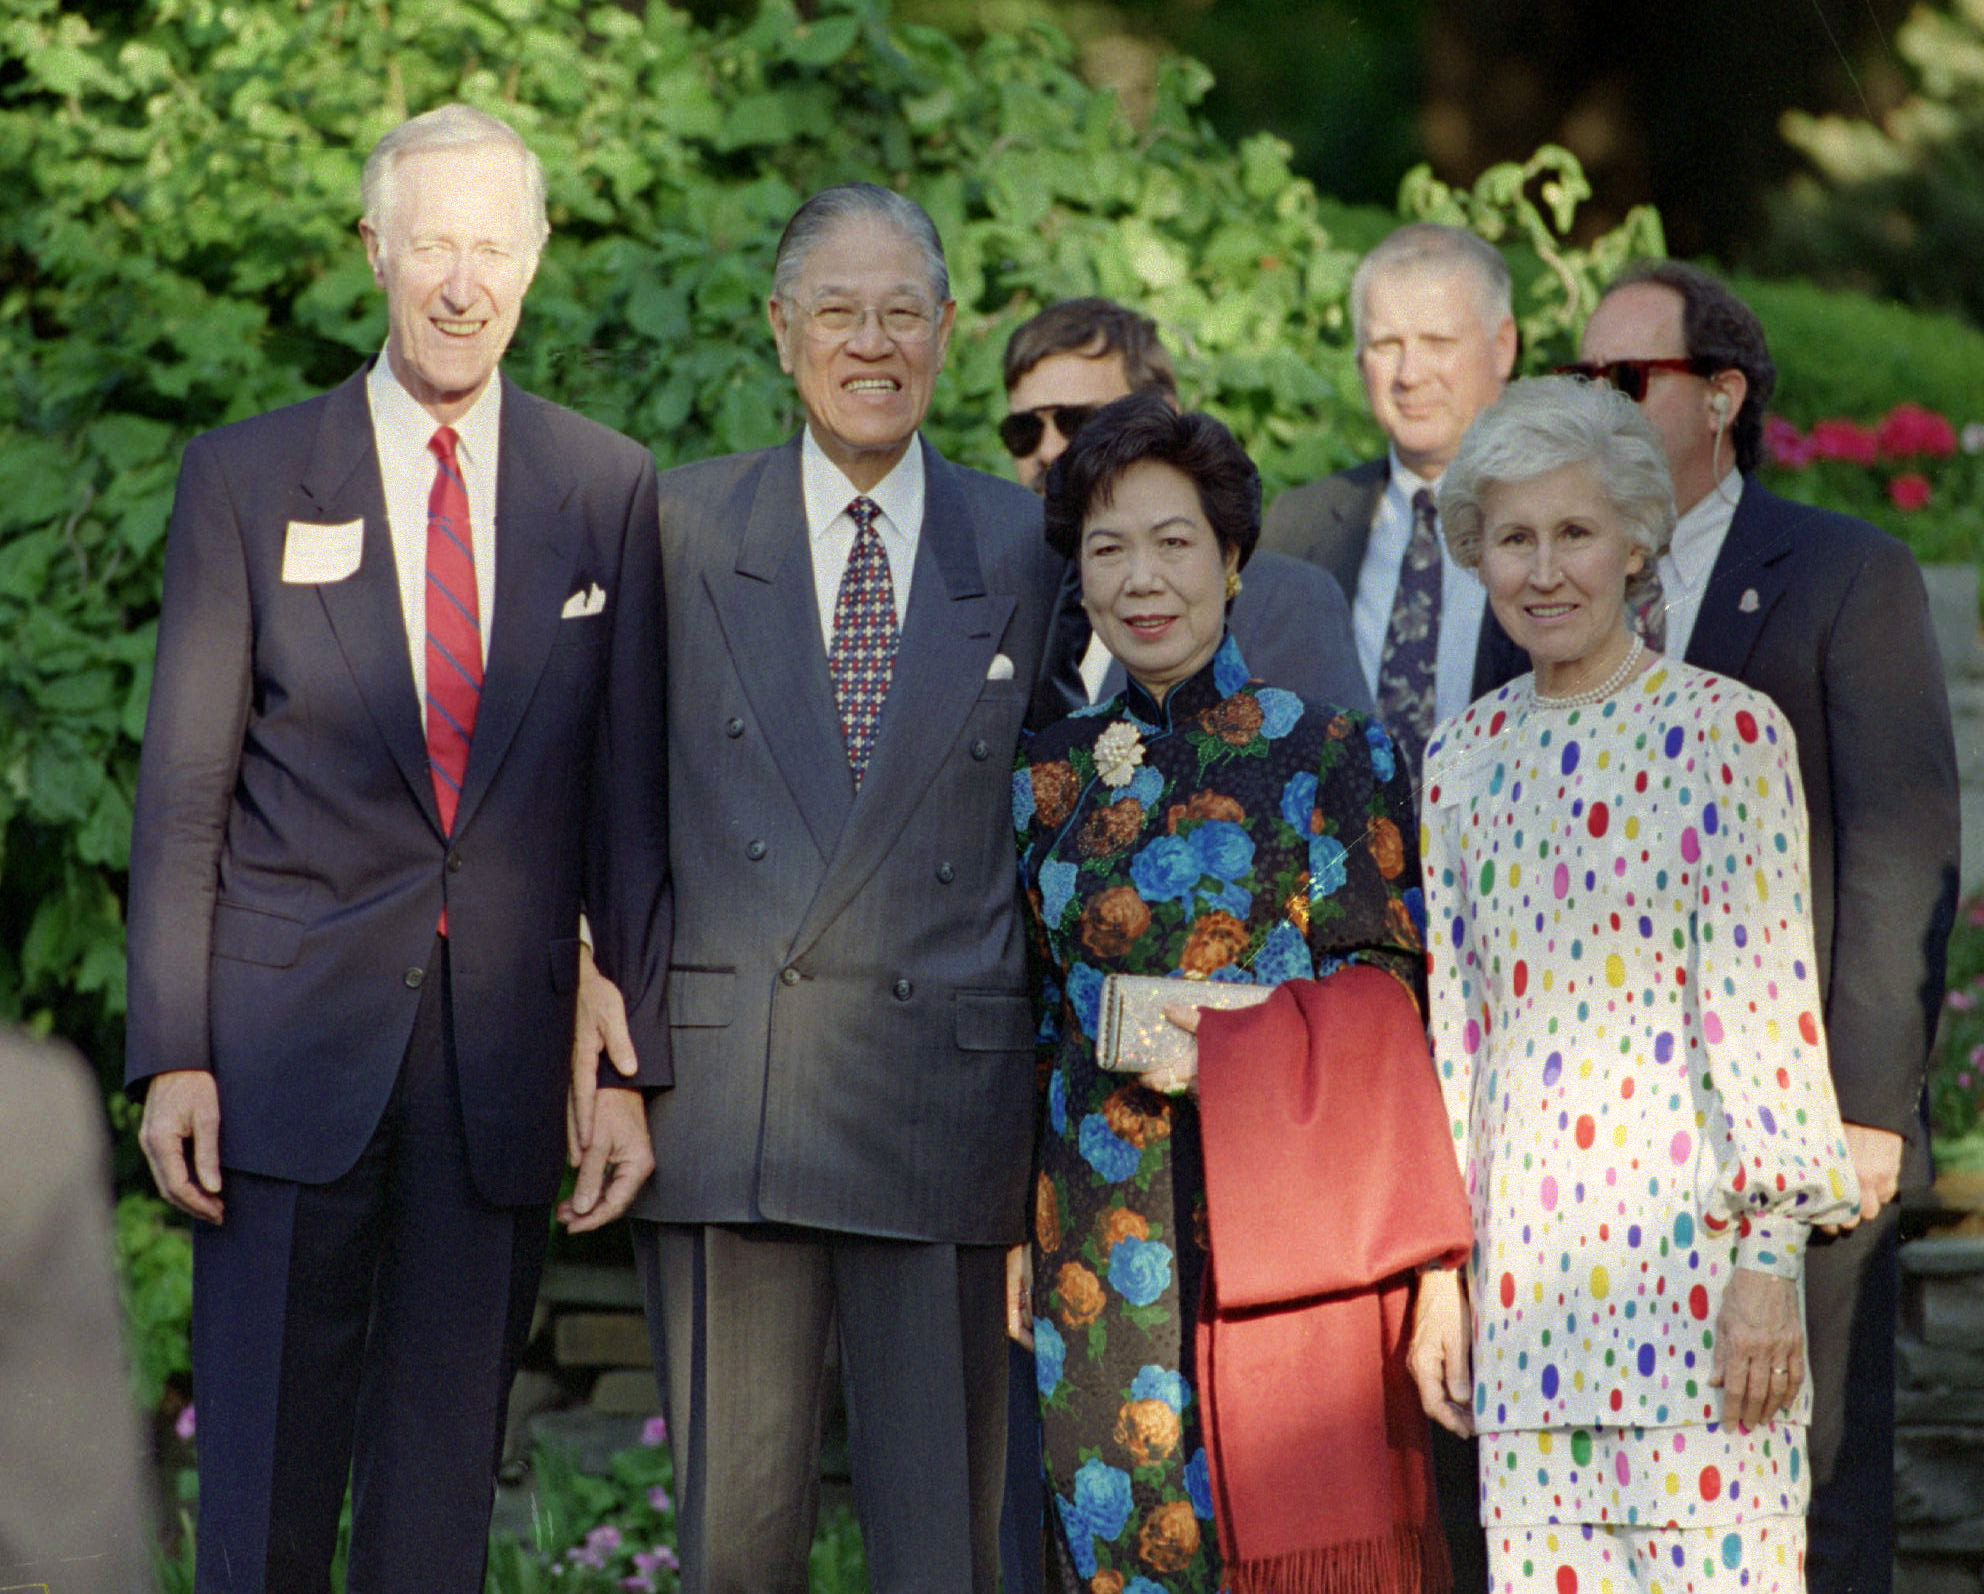 Cornell University President Frank Rhodes and Taiwan President Lee Teng-hui pose with their wives, Lee Wen-hui and Rosa Rhodes, before a private dinner at the president's home June 10, 1995 in Ithaca , New York.